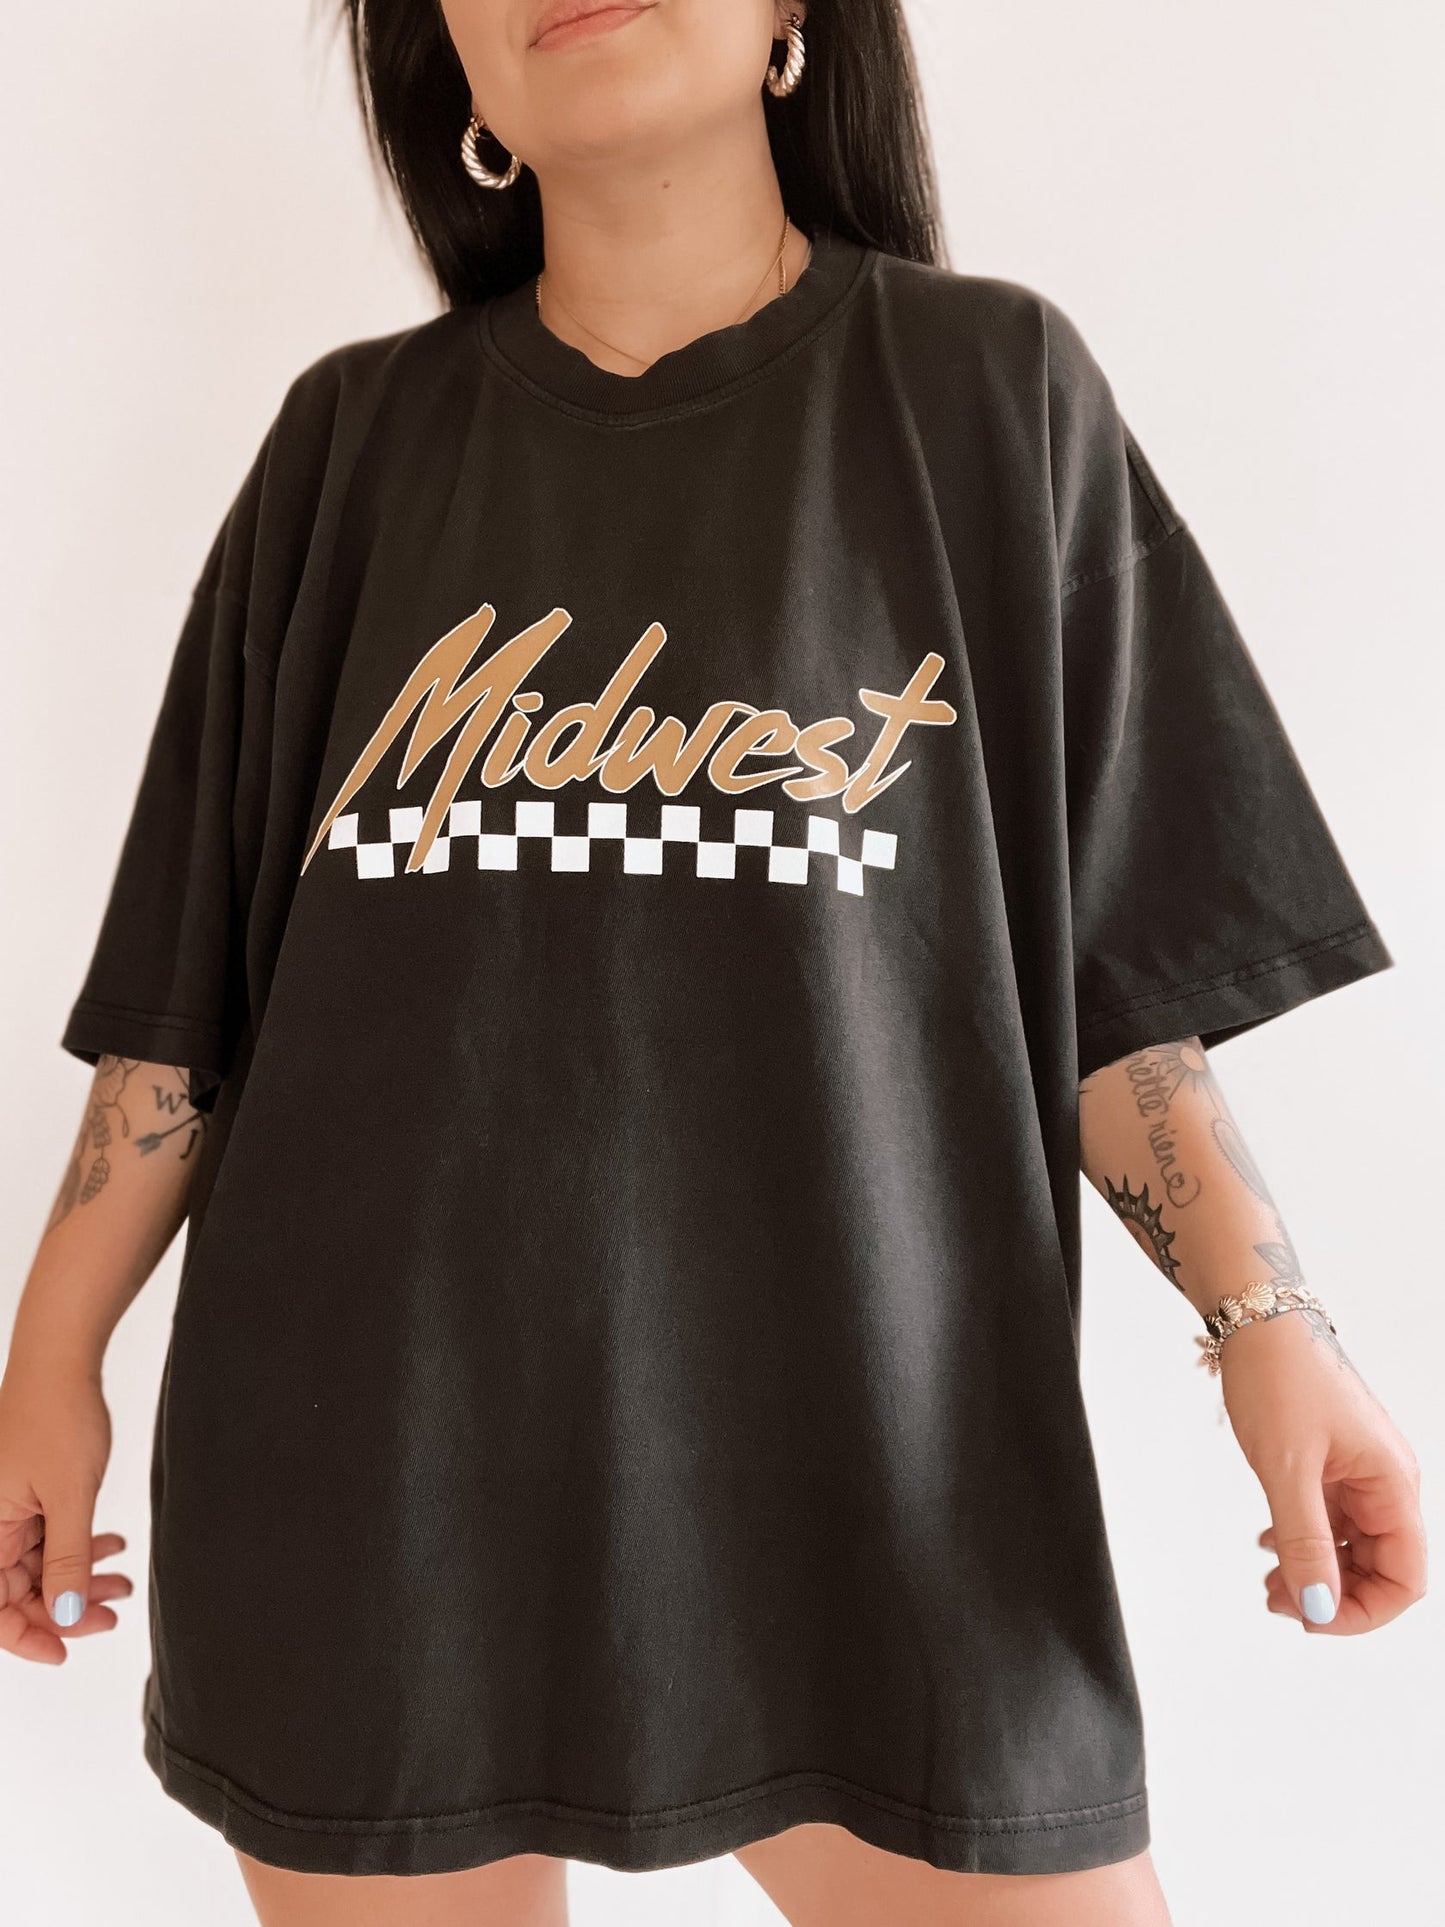 Midwest Checkered Oversized Graphic Tee - Black